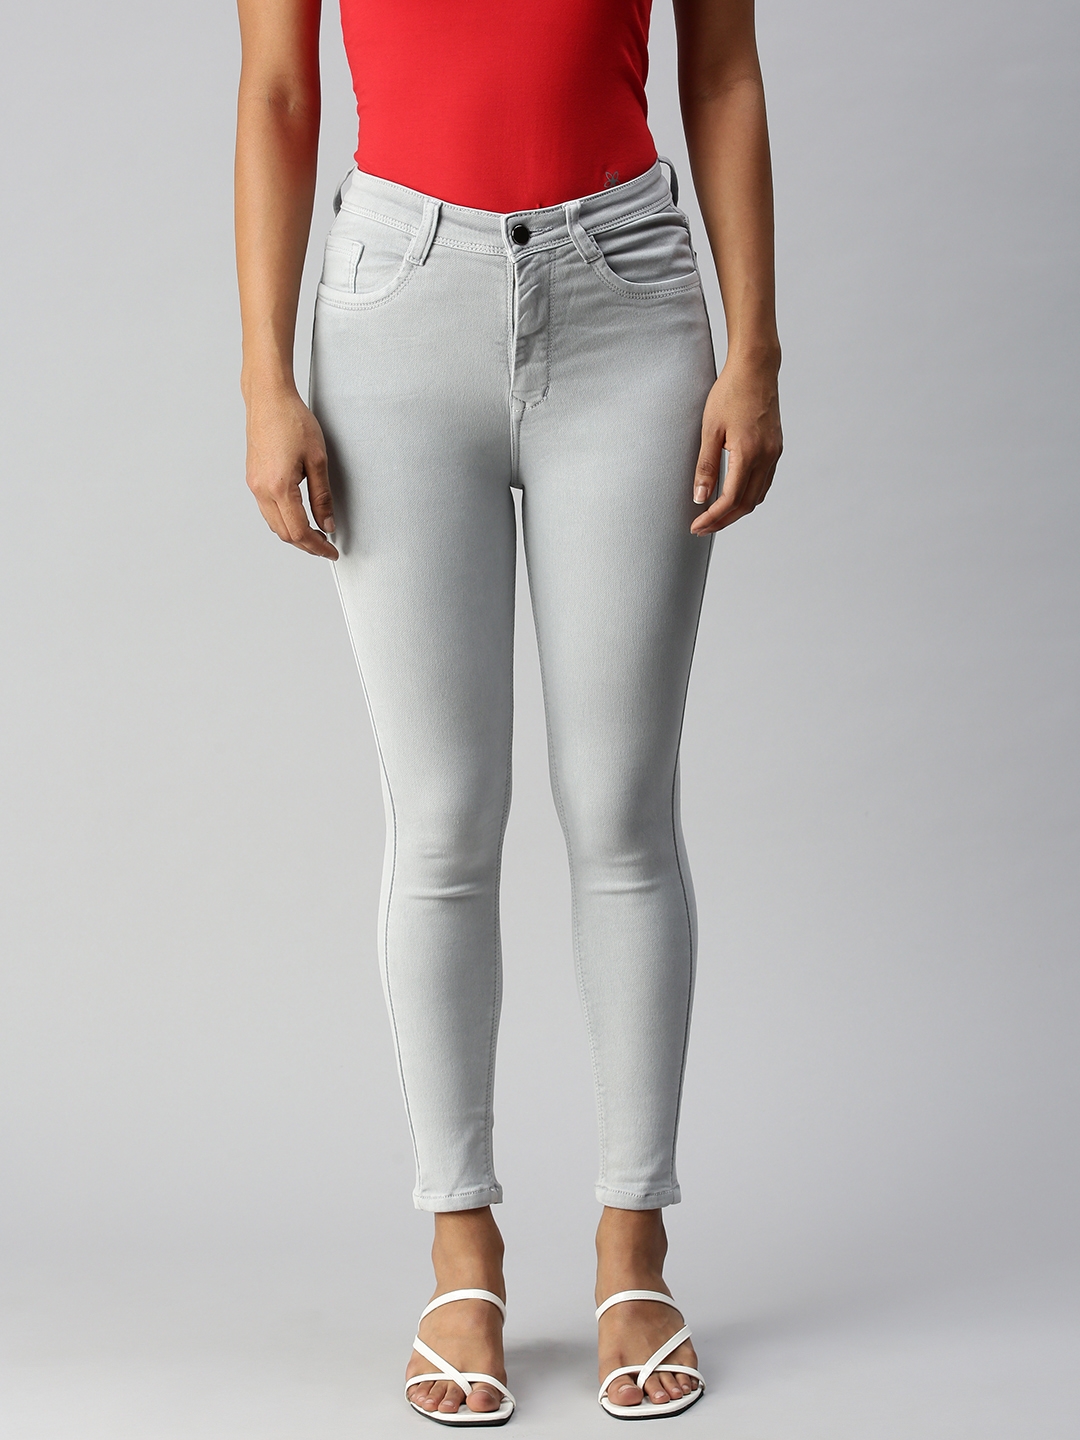 Showoff | Showoff Women's Super Skinny Fit Clean Look Grey Jeans